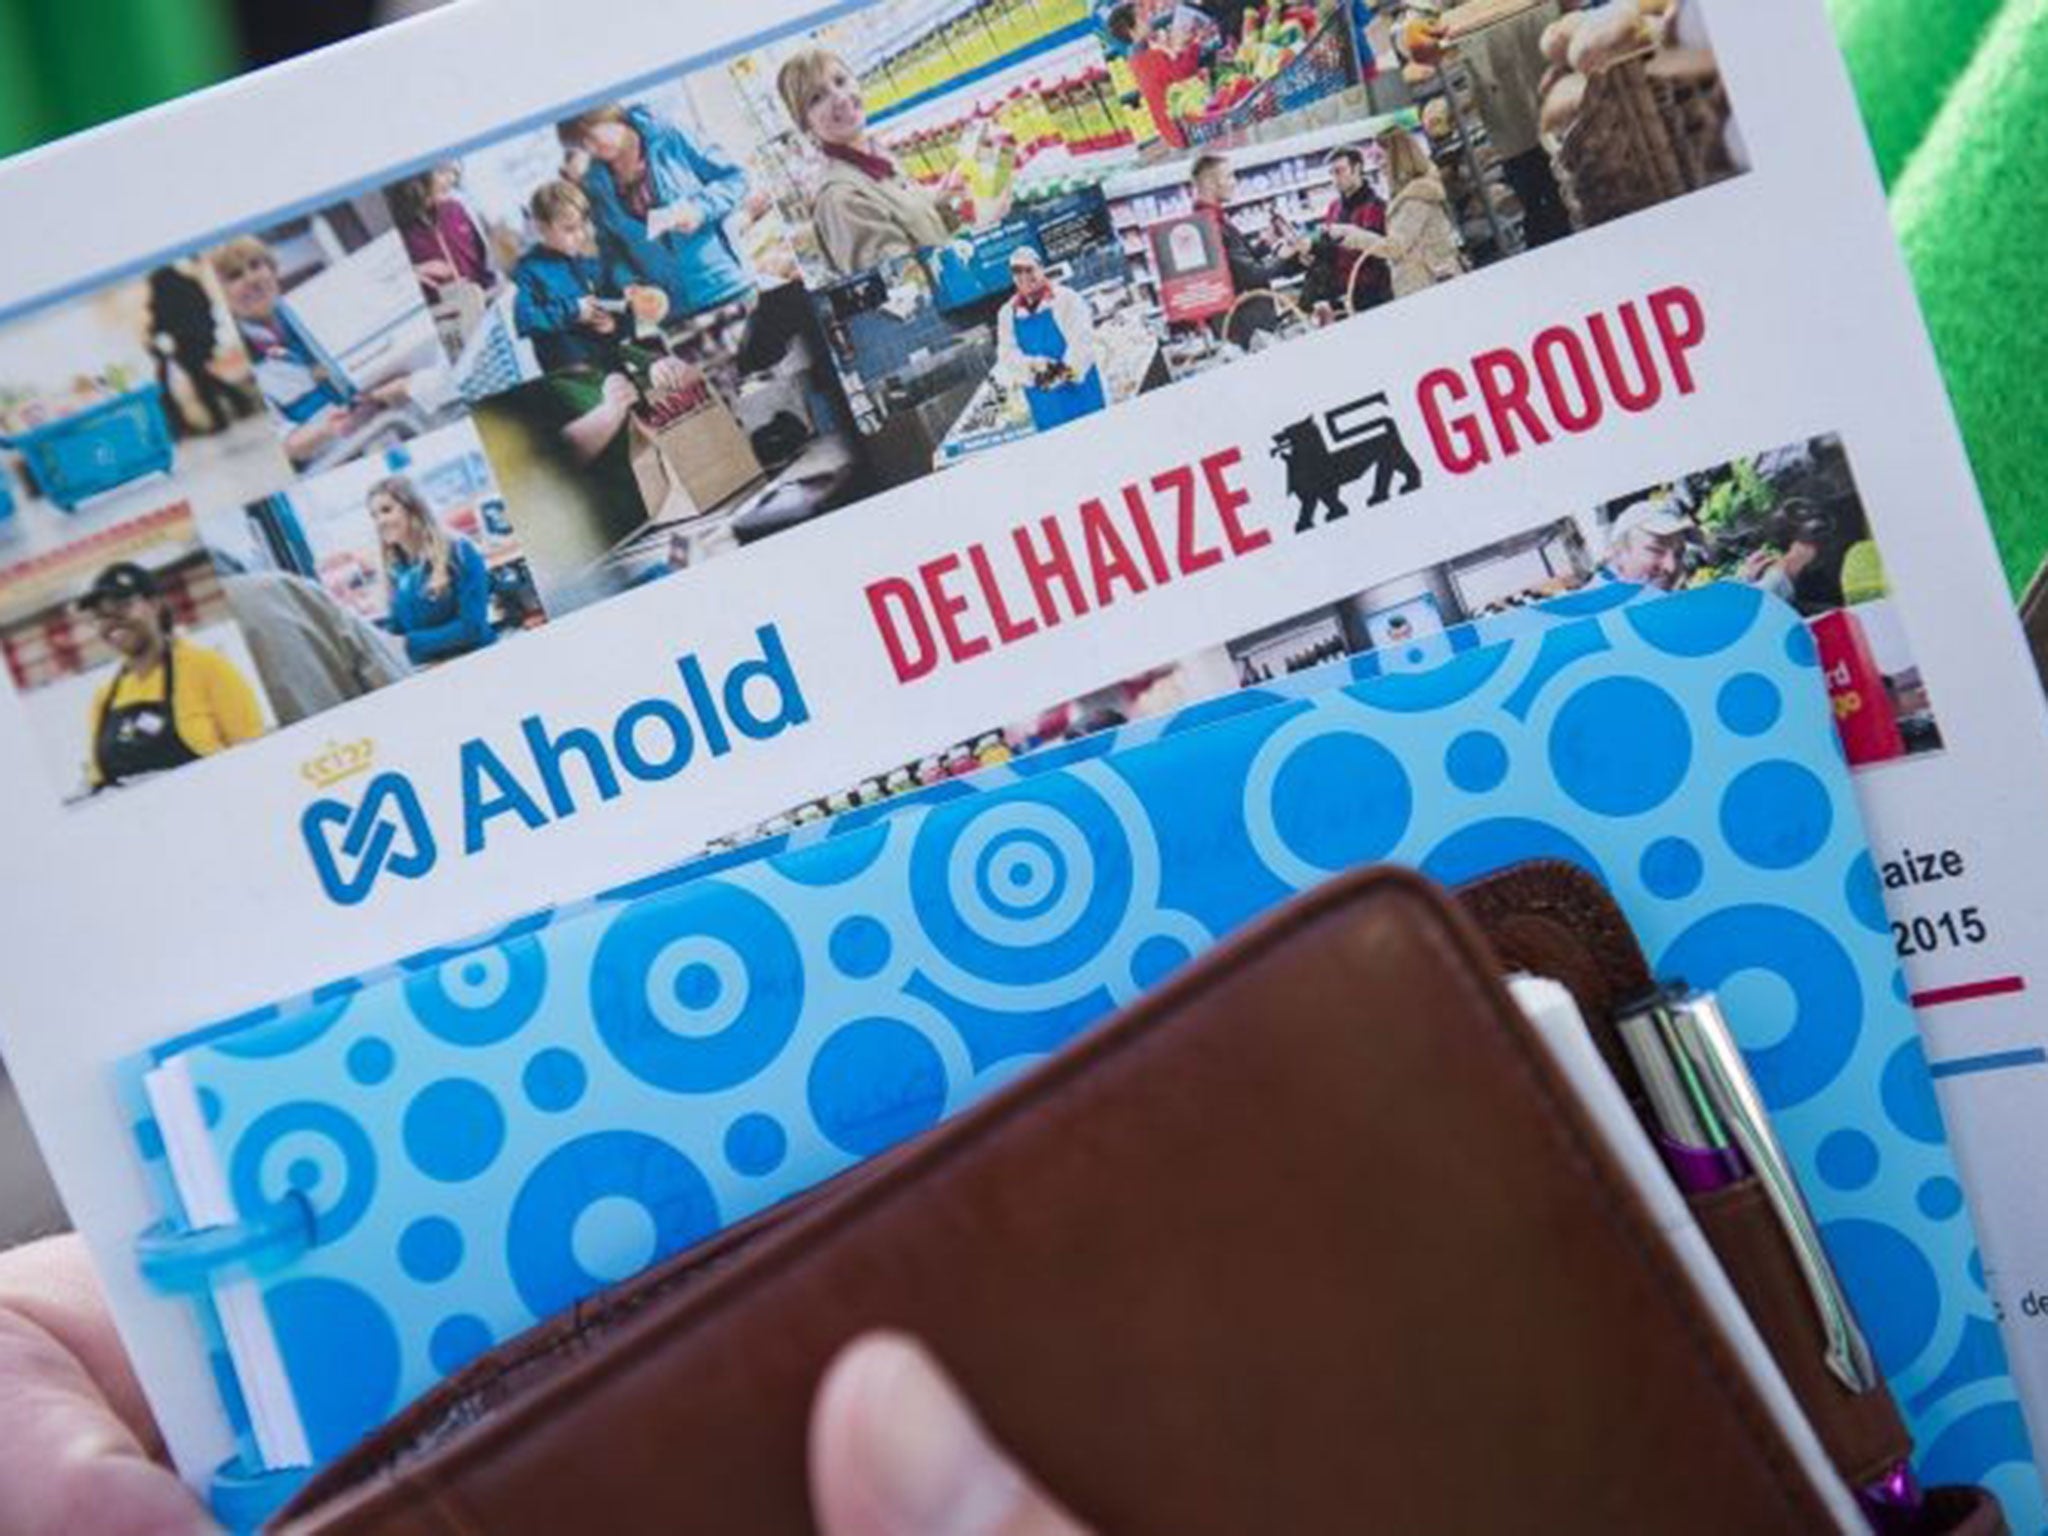 Dutch retail giant Ahold and its Belgian rival Delhaize on June 24 announced their merger, creating one of the world's largest retail companies with a turnover of more than 54 billion euros